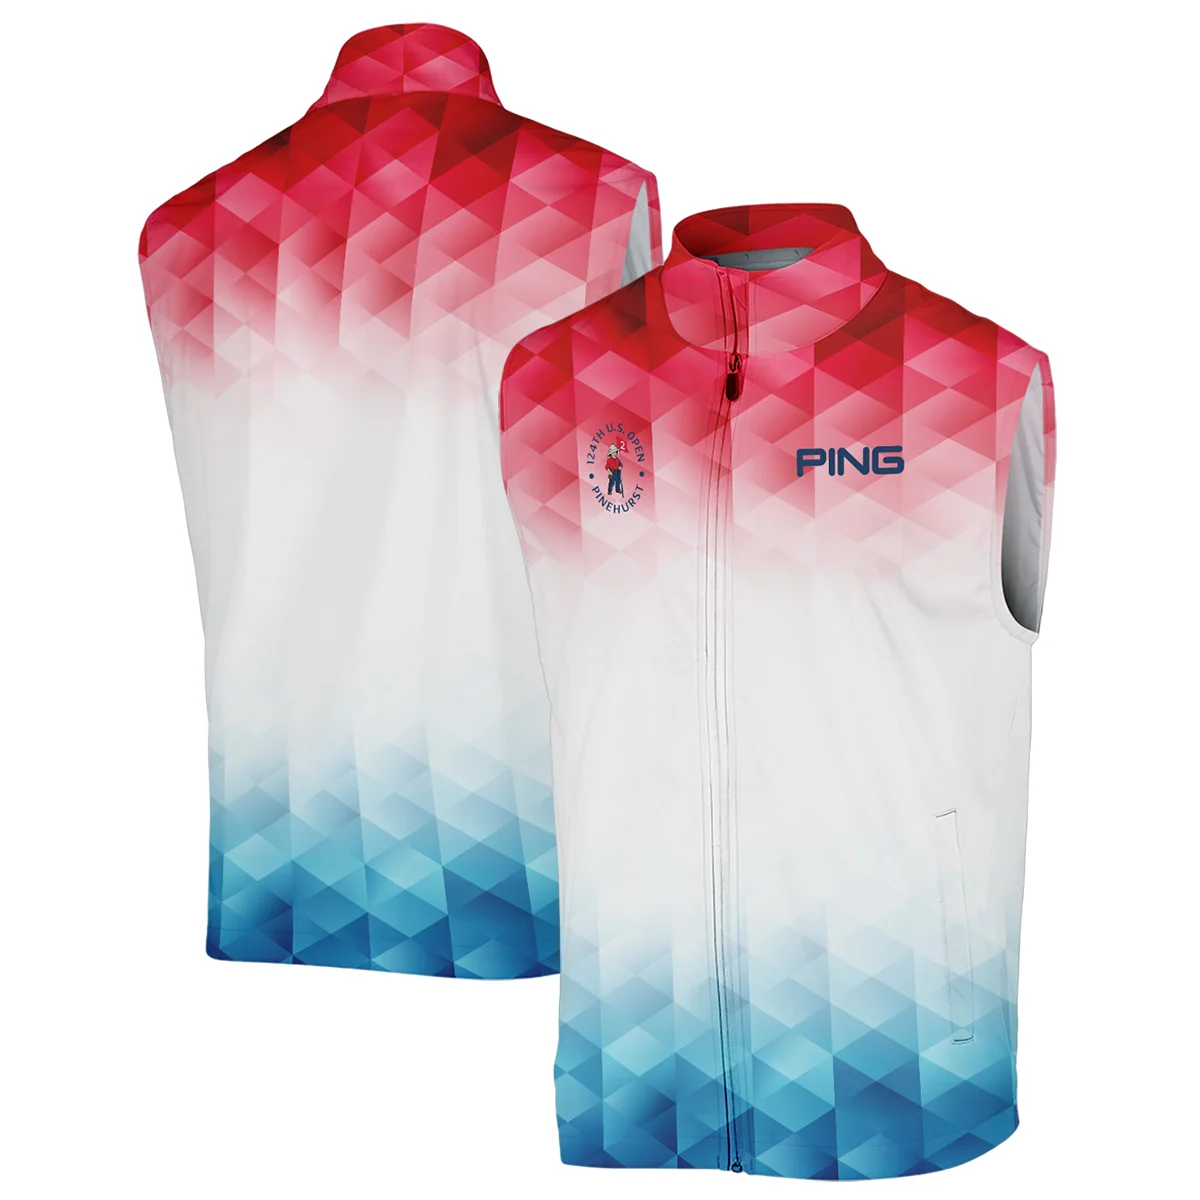 124th U.S. Open Pinehurst Ping Golf Sport Long Polo Shirt Blue Red Abstract Geometric Triangles All Over Print Long Polo Shirt For Men